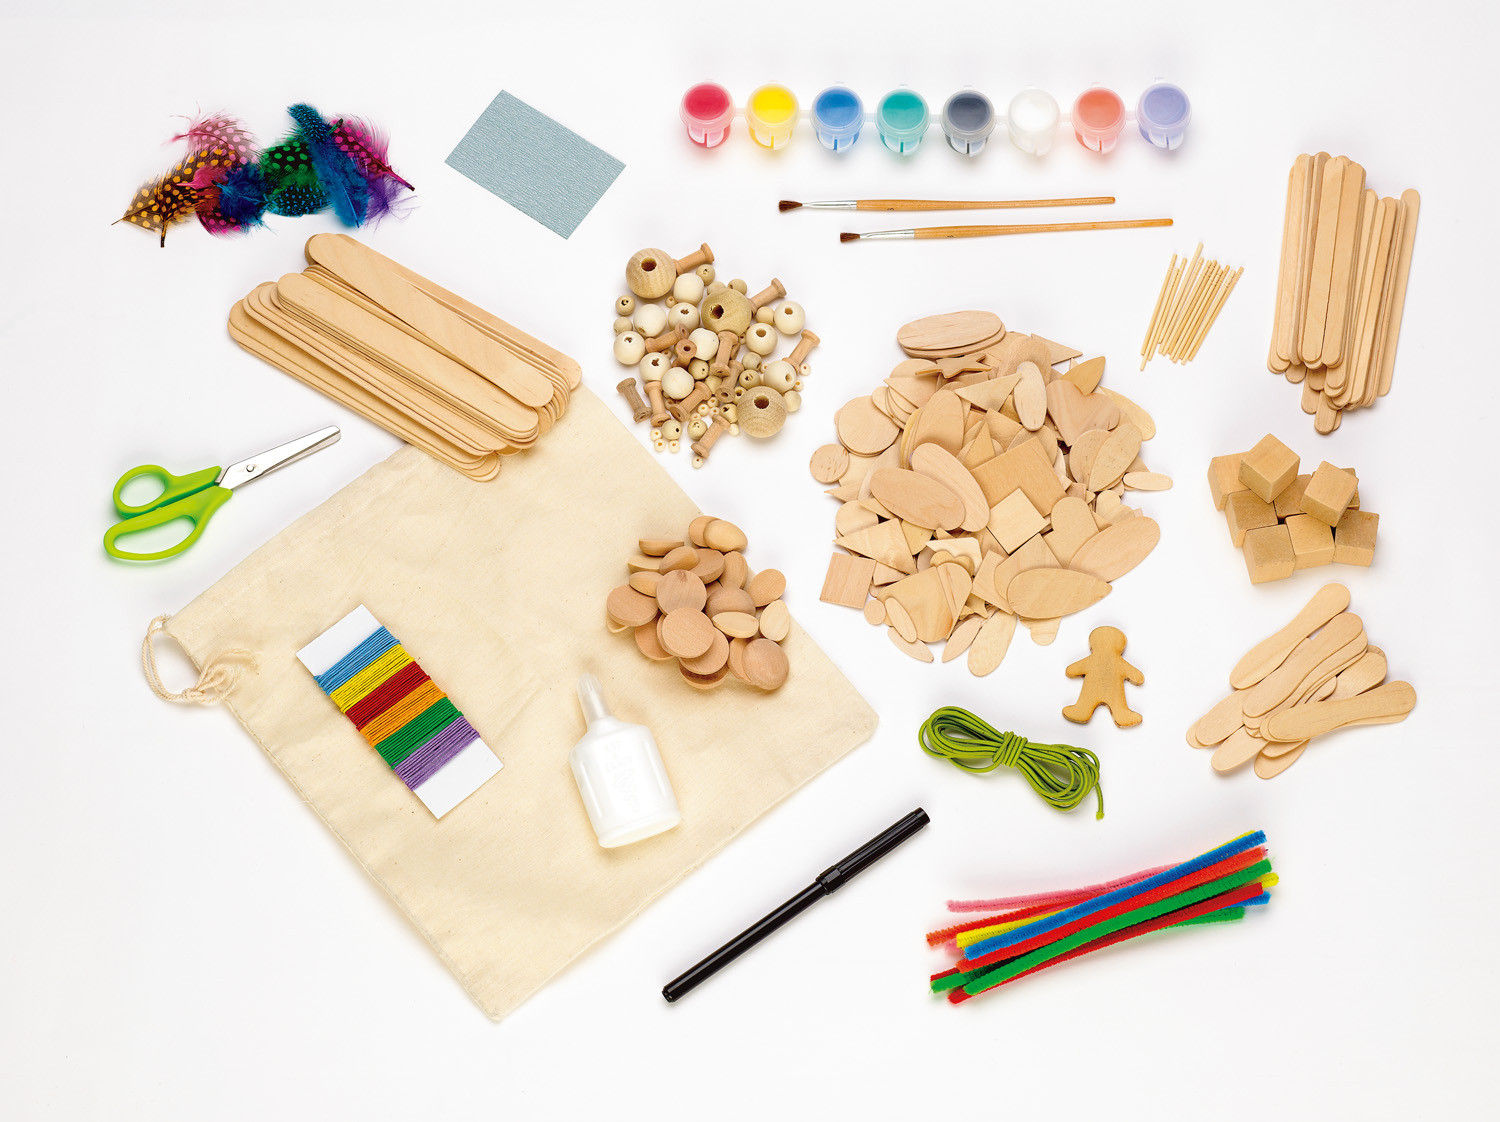 Wood Craft Kits For Kids
 Creativity for Kids Classic Wood Crafts Kit Review